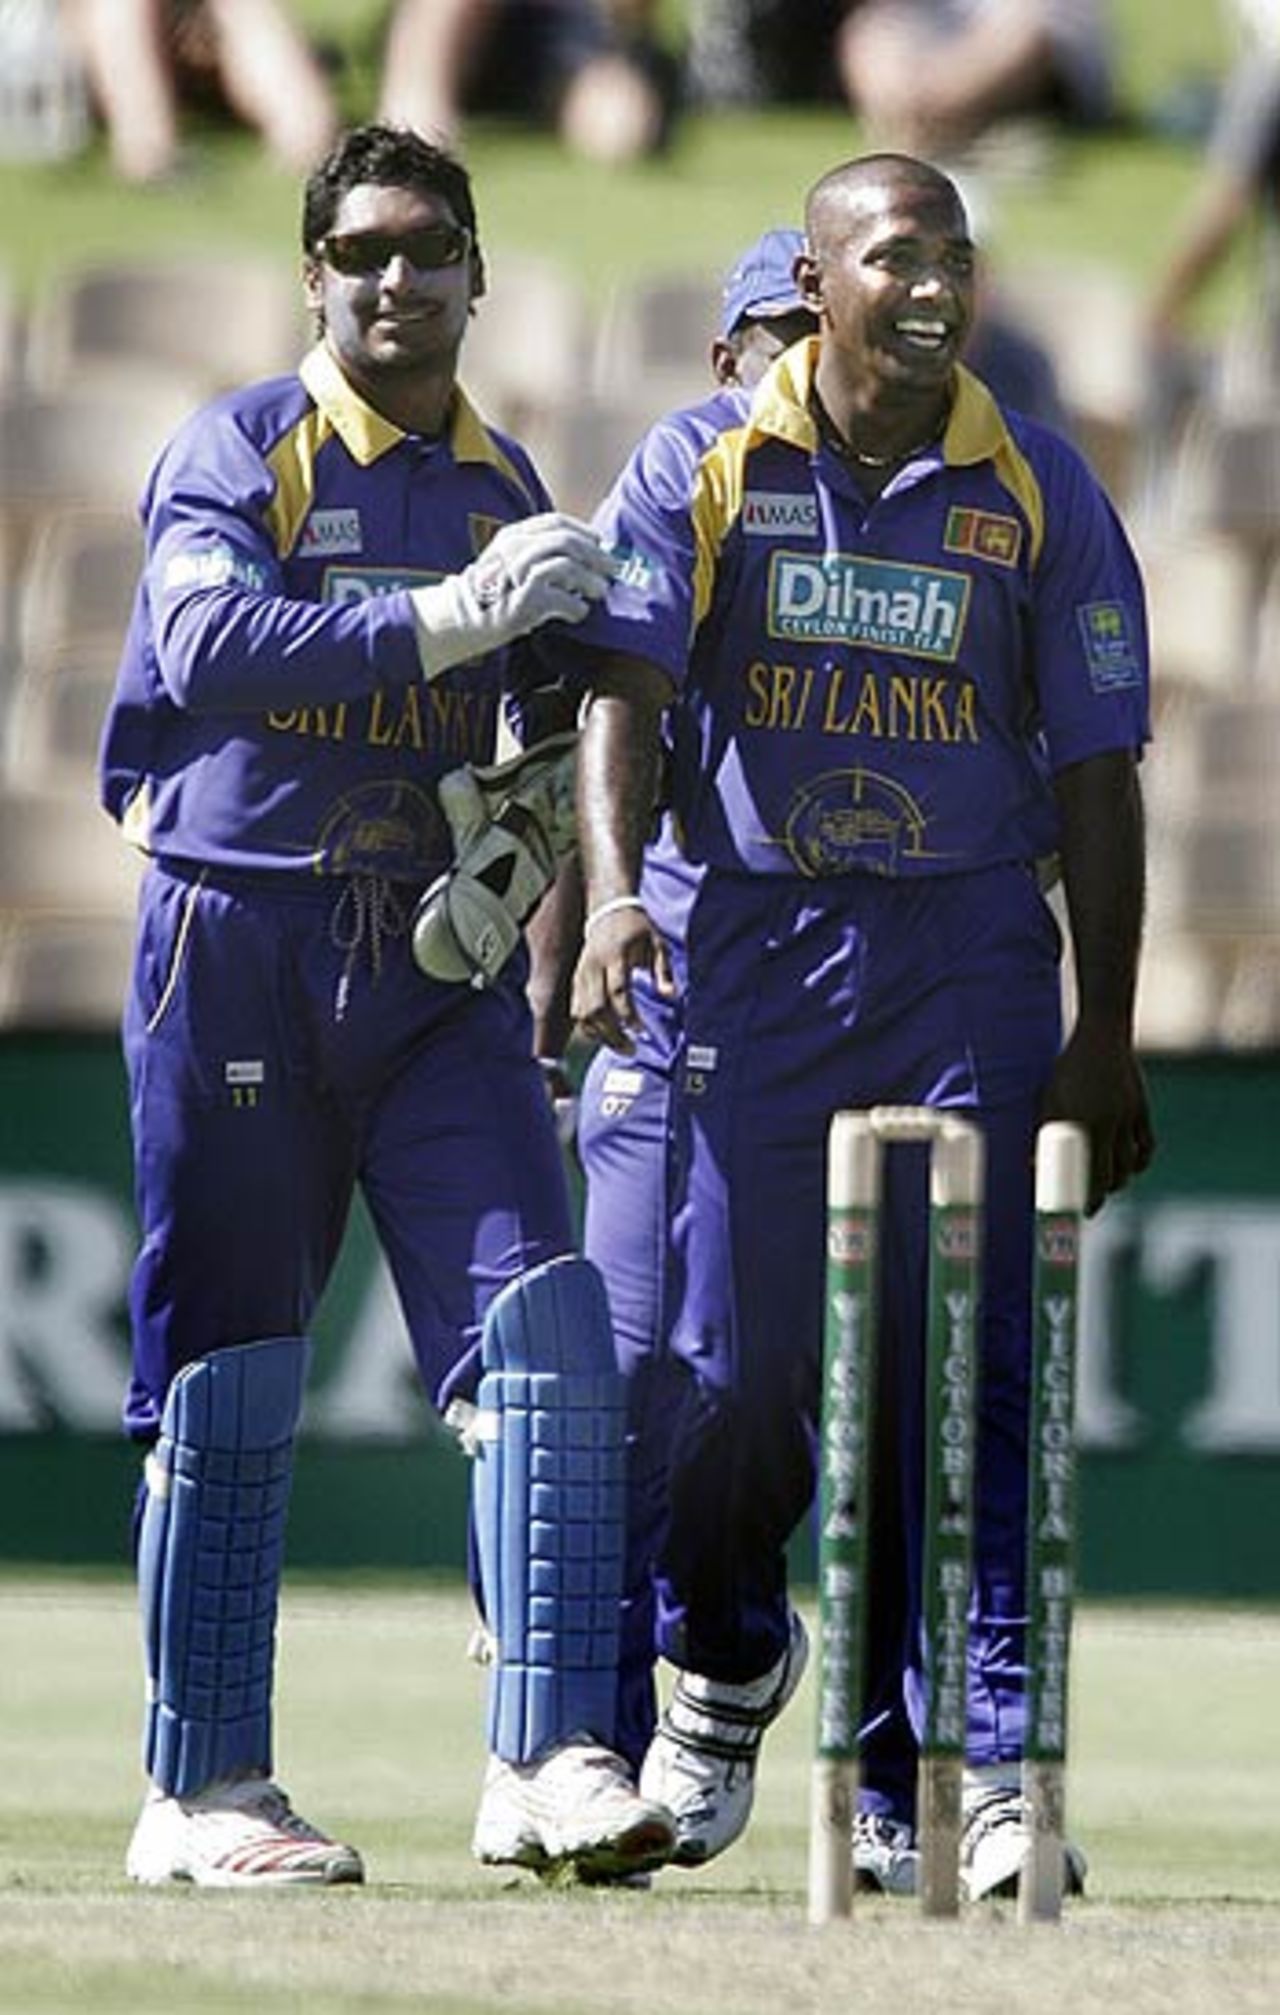 Ruchira Perera is jubilant after taking the wicket of Herschelle Gibbs, South Africa v Sri Lanka, 6th match, VB Series, Adelaide, January 24, 2006